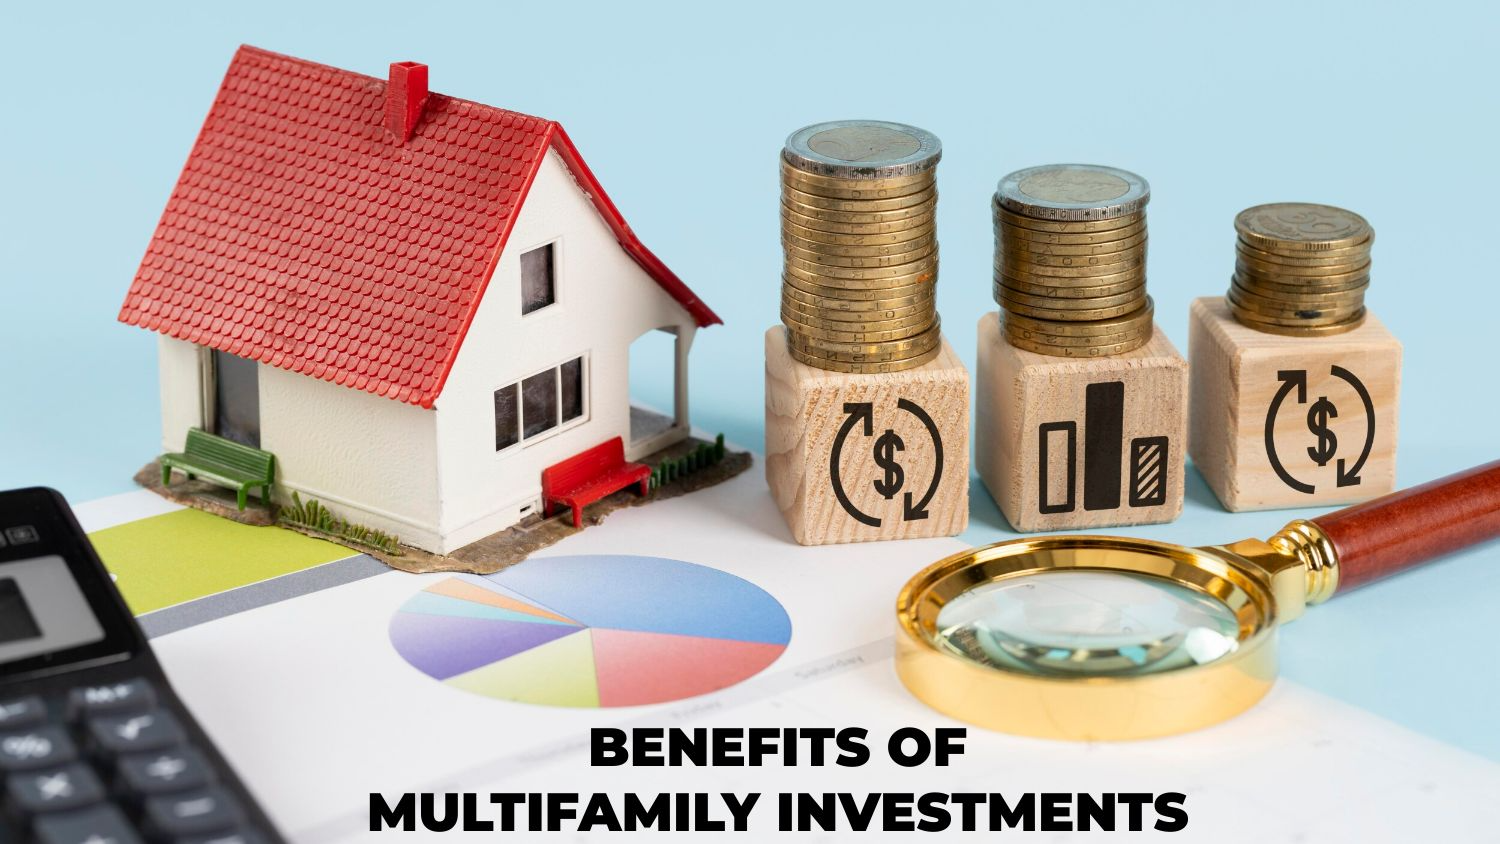 Investing in multifamily real estate properties